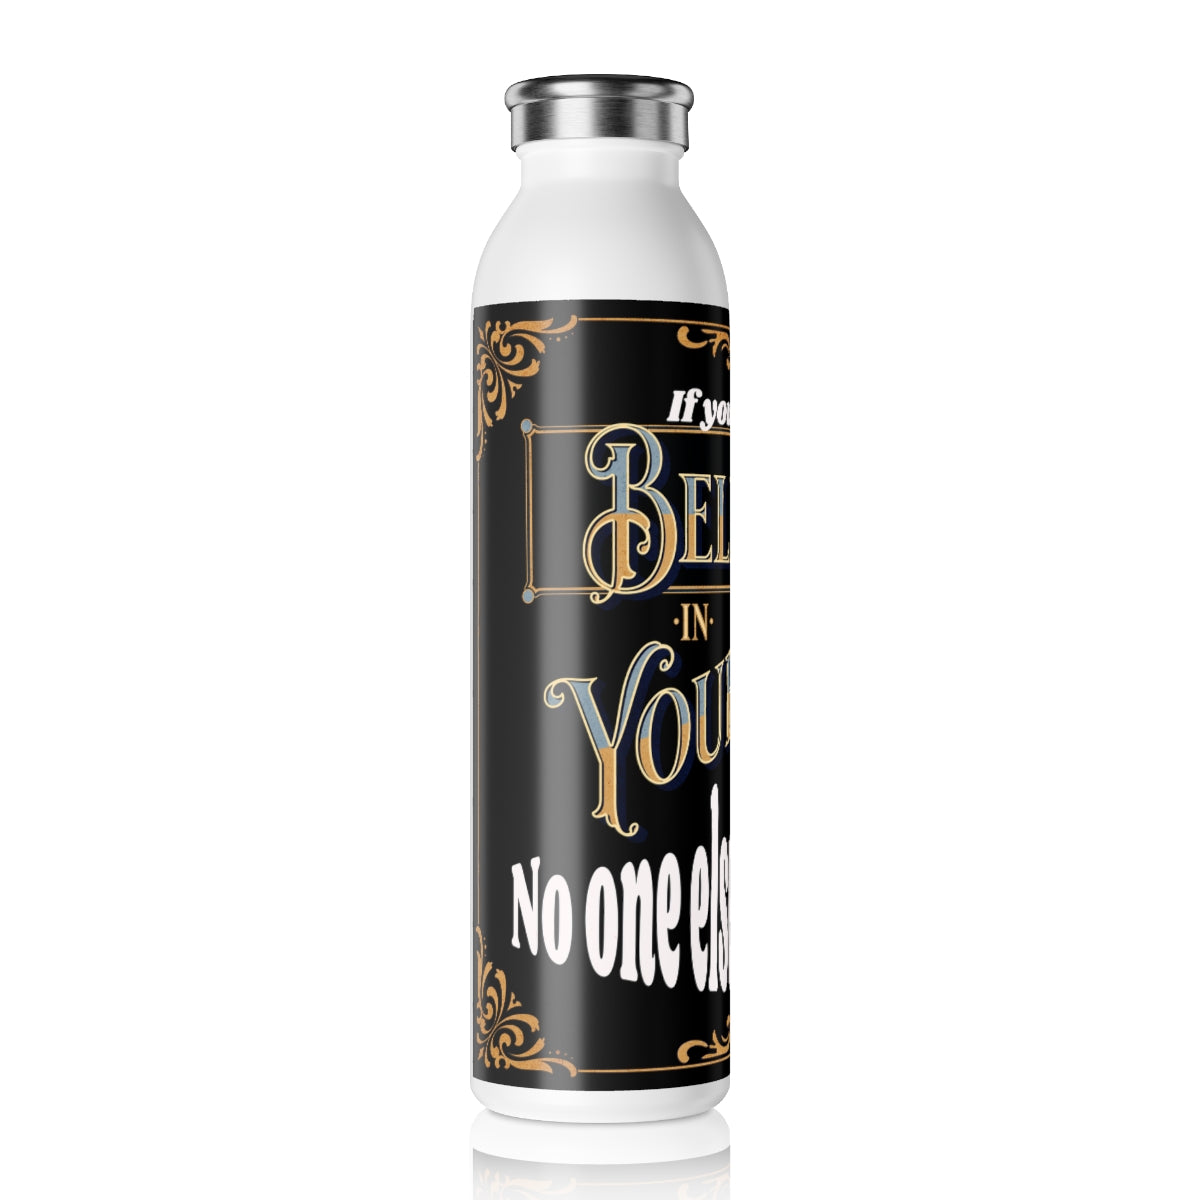 If You Don't Believe in Yourself, Nobody Else Will Either - Slim Water Bottle